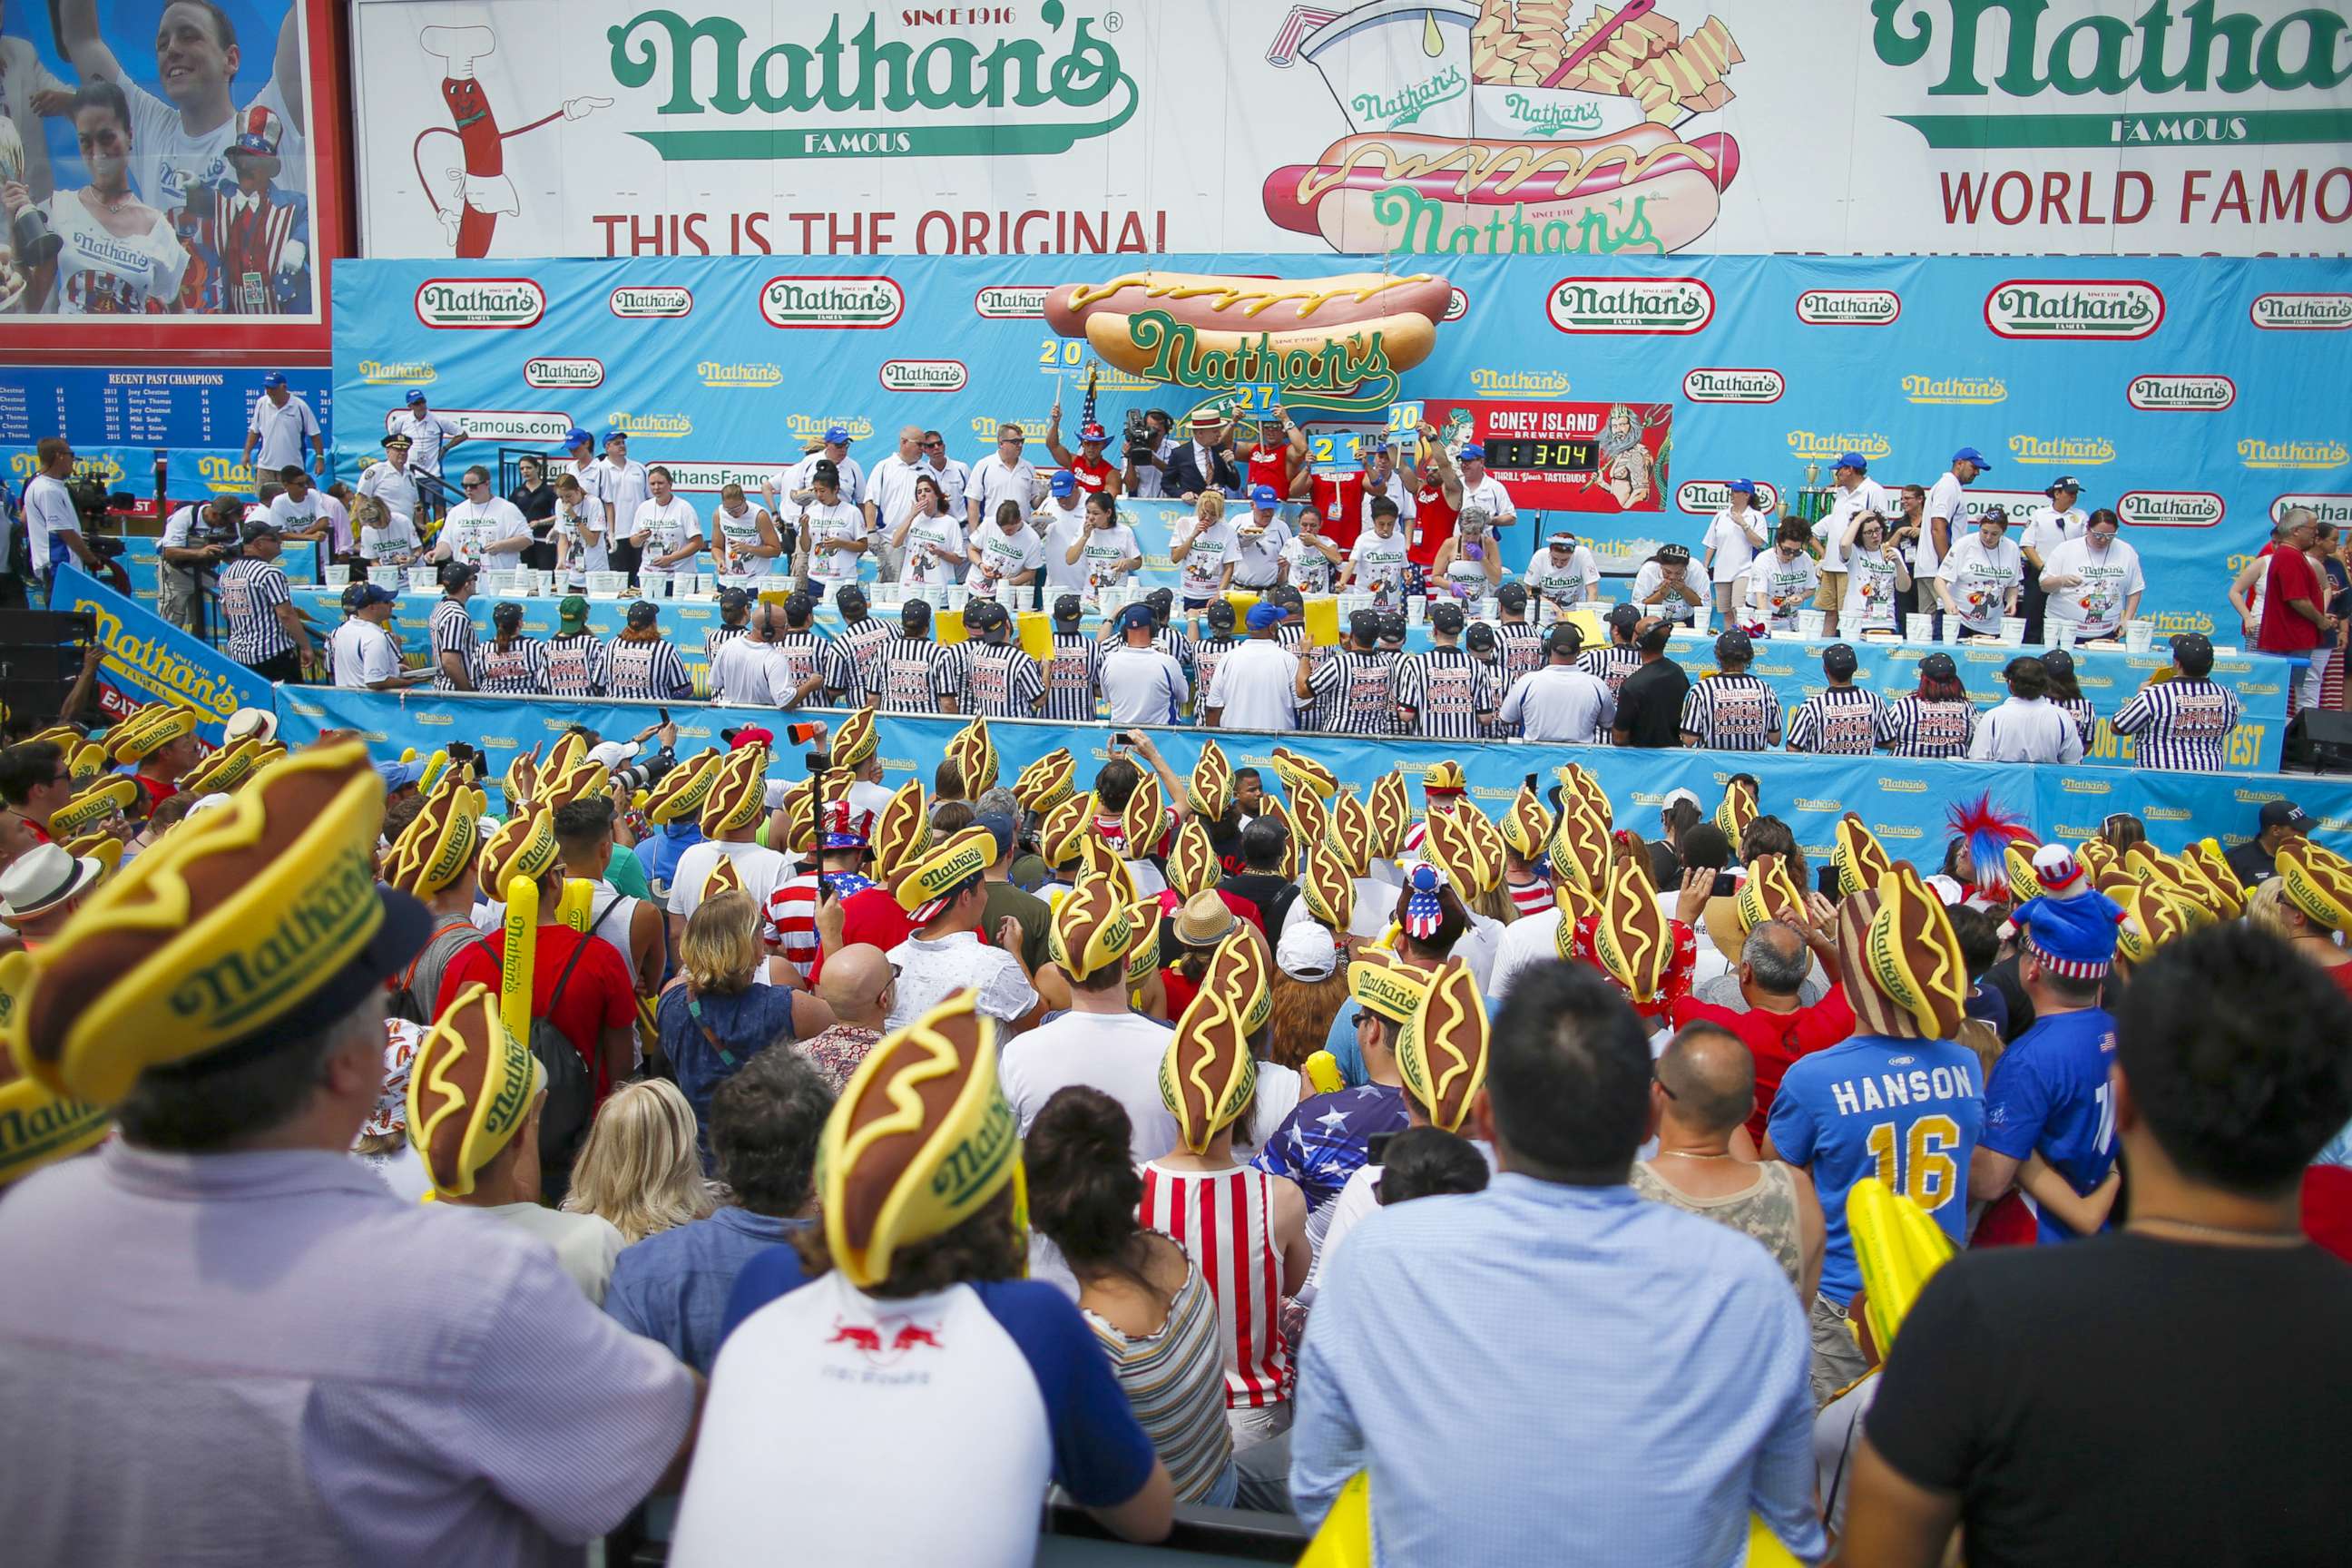 PHOTO: Women compete during the annual Nathan's Hot Dog Eating Contest on July 4, 2018 in Coney Island.